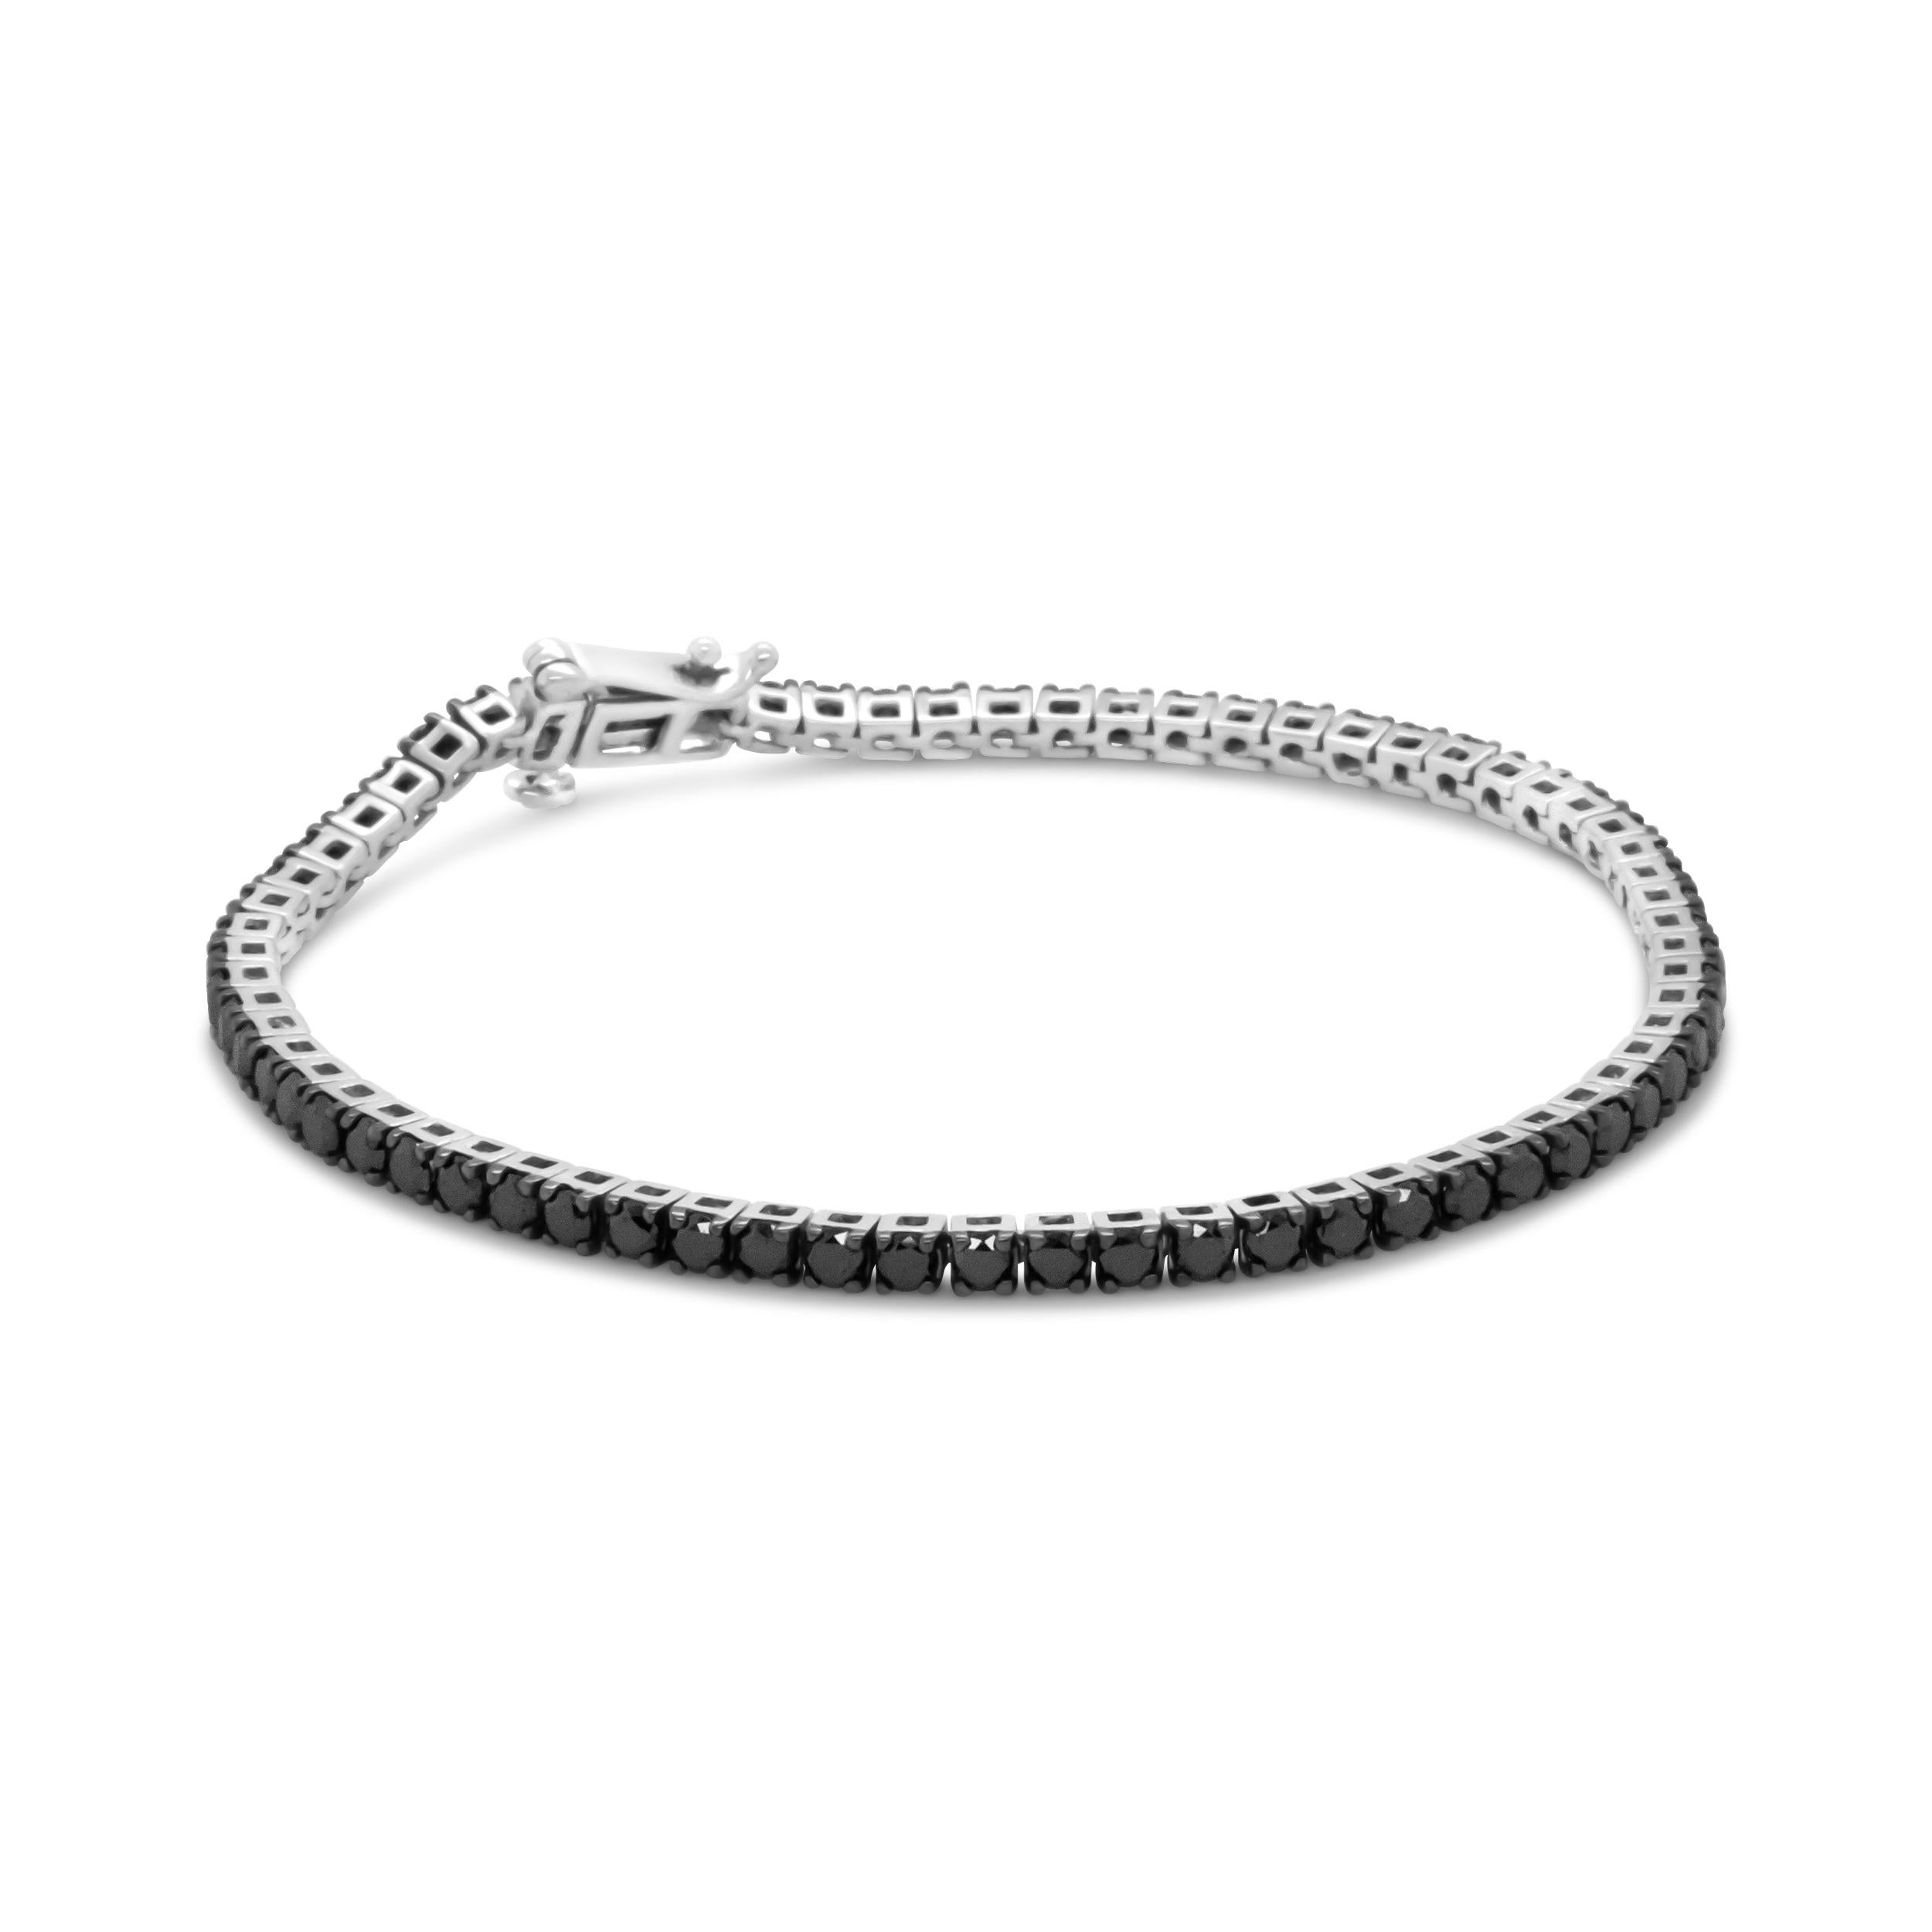 Elegant and timeless, this gorgeous .925 sterling tennis bracelet features 4.0 carat total weight of natural round brilliant cut treated black diamonds with a whopping 66 individual stones in all. The tennis bracelet has hinged links consisting of a